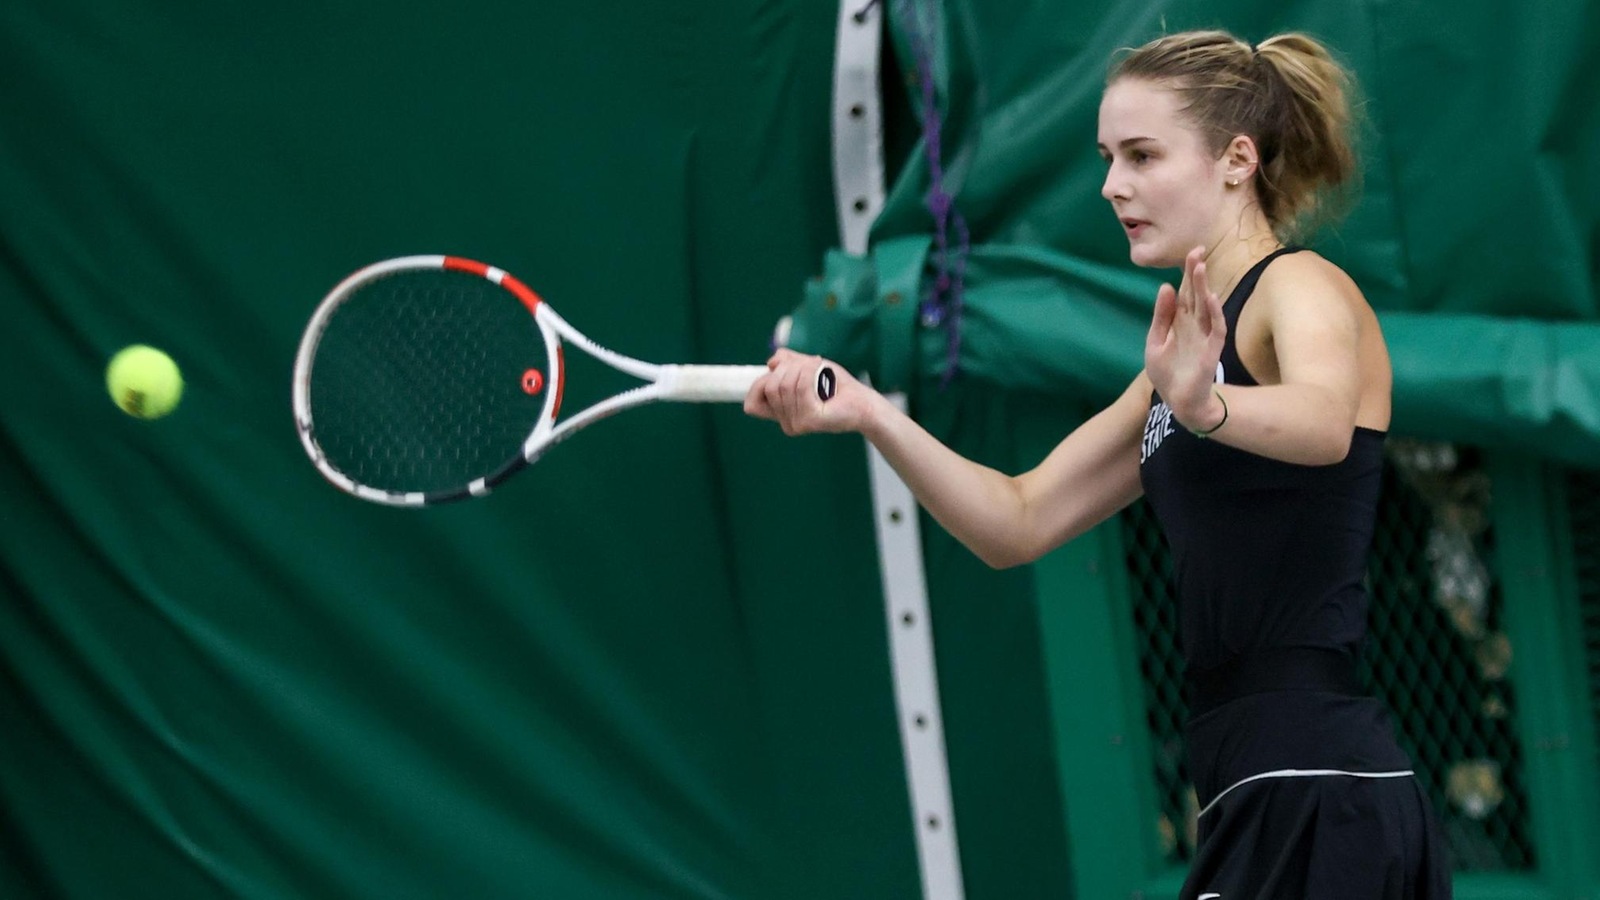 Cleveland State Women’s Tennis Remains Perfect In #HLTennis Play With 5-2 Victory At NKU